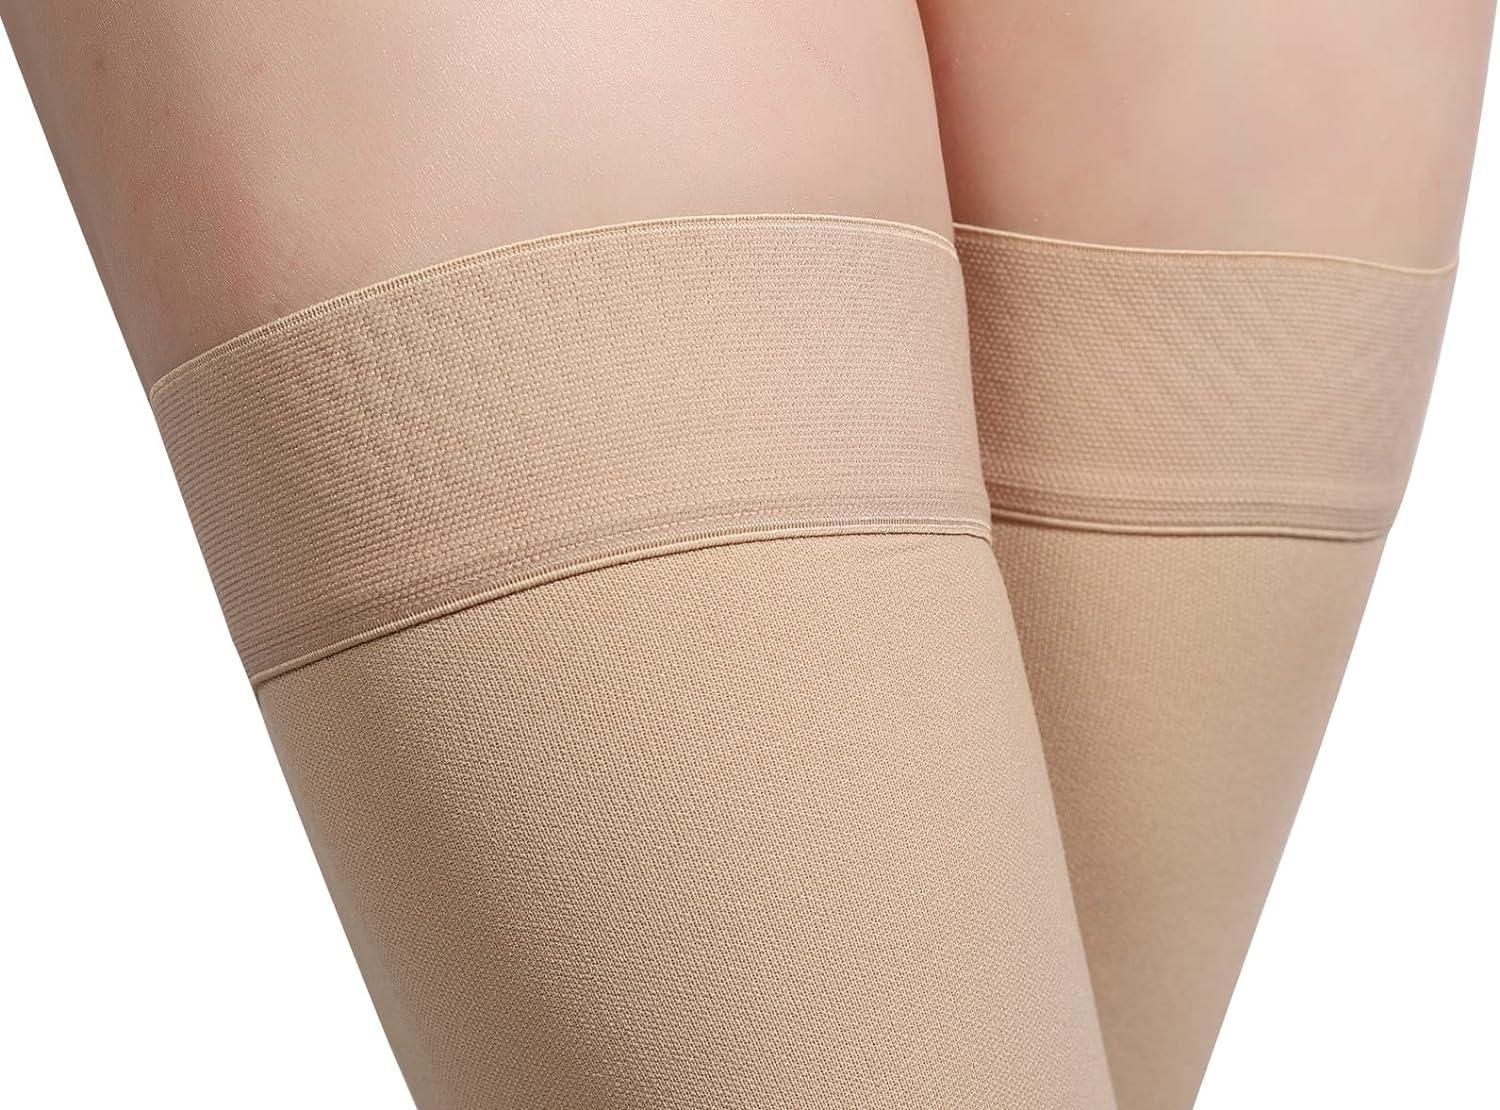 Thigh High Compression Stocking Footless - Pair  